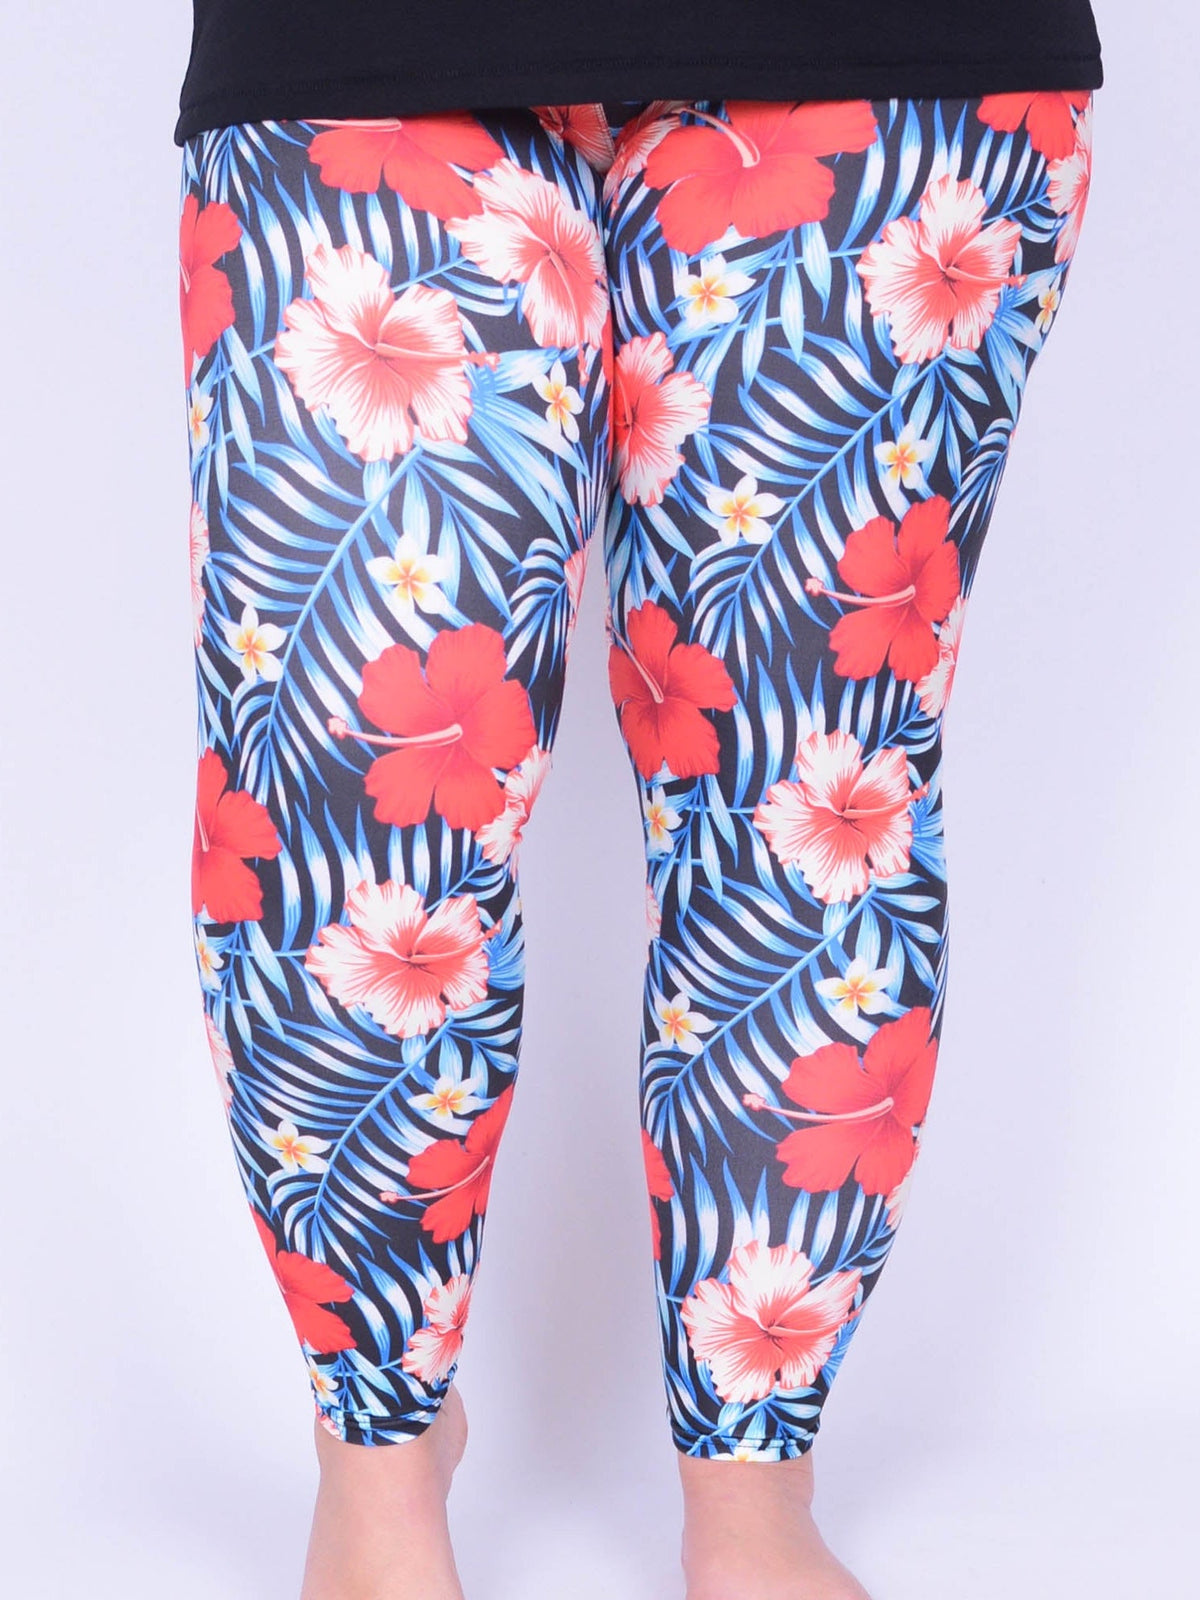 Leggings - Tropical Floral - L33, Trousers, Pure Plus Clothing, Lagenlook Clothing, Plus Size Fashion, Over 50 Fashion